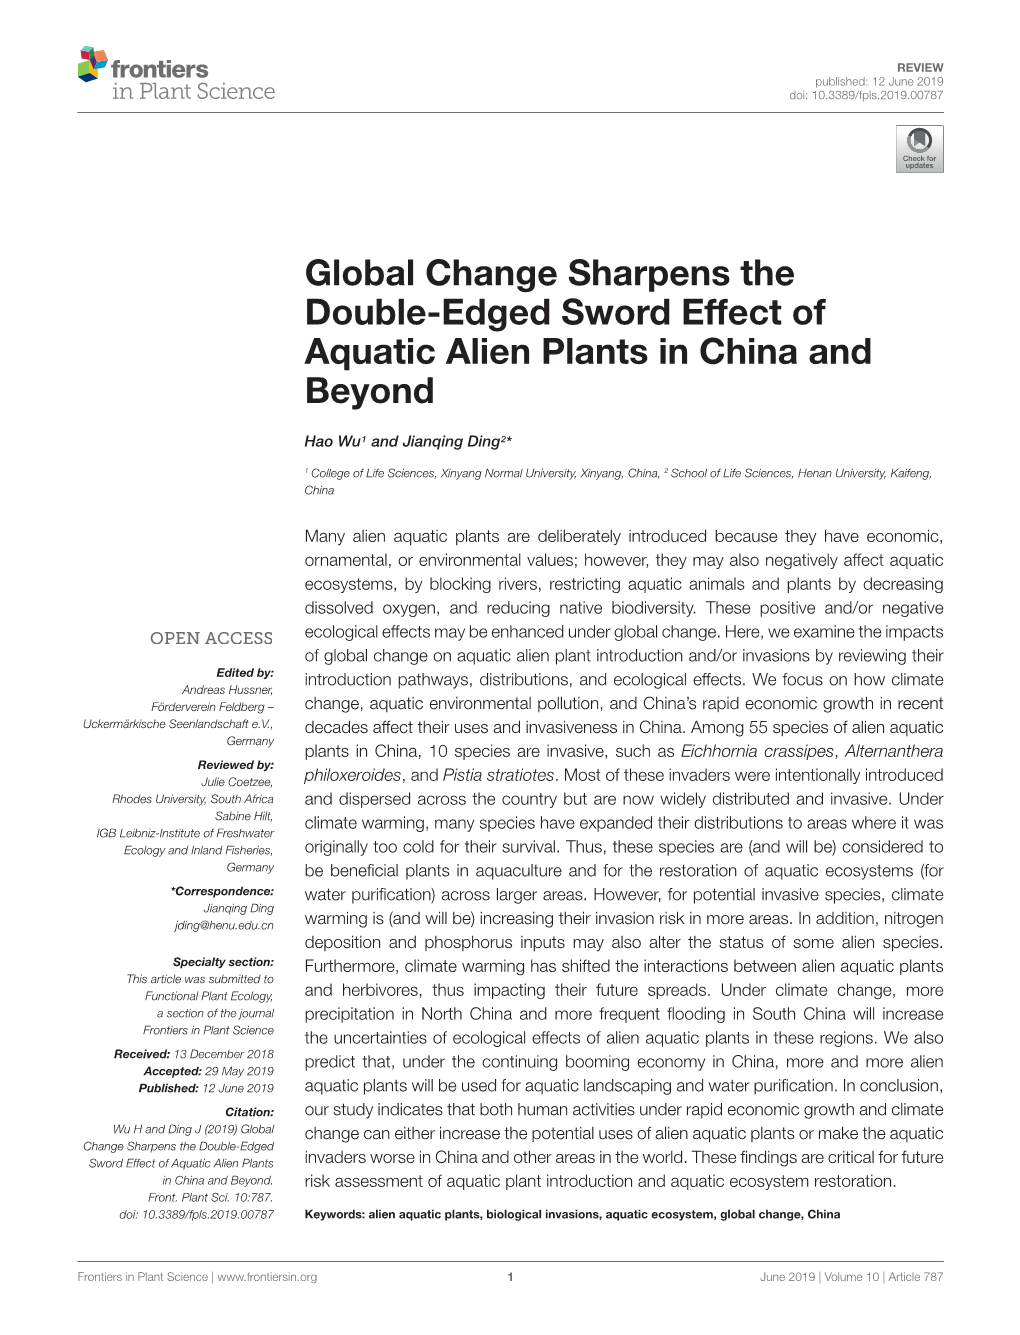 Wu,H., Ding*,J. 2019. Global Change Sharpens the Double-Edged Sword